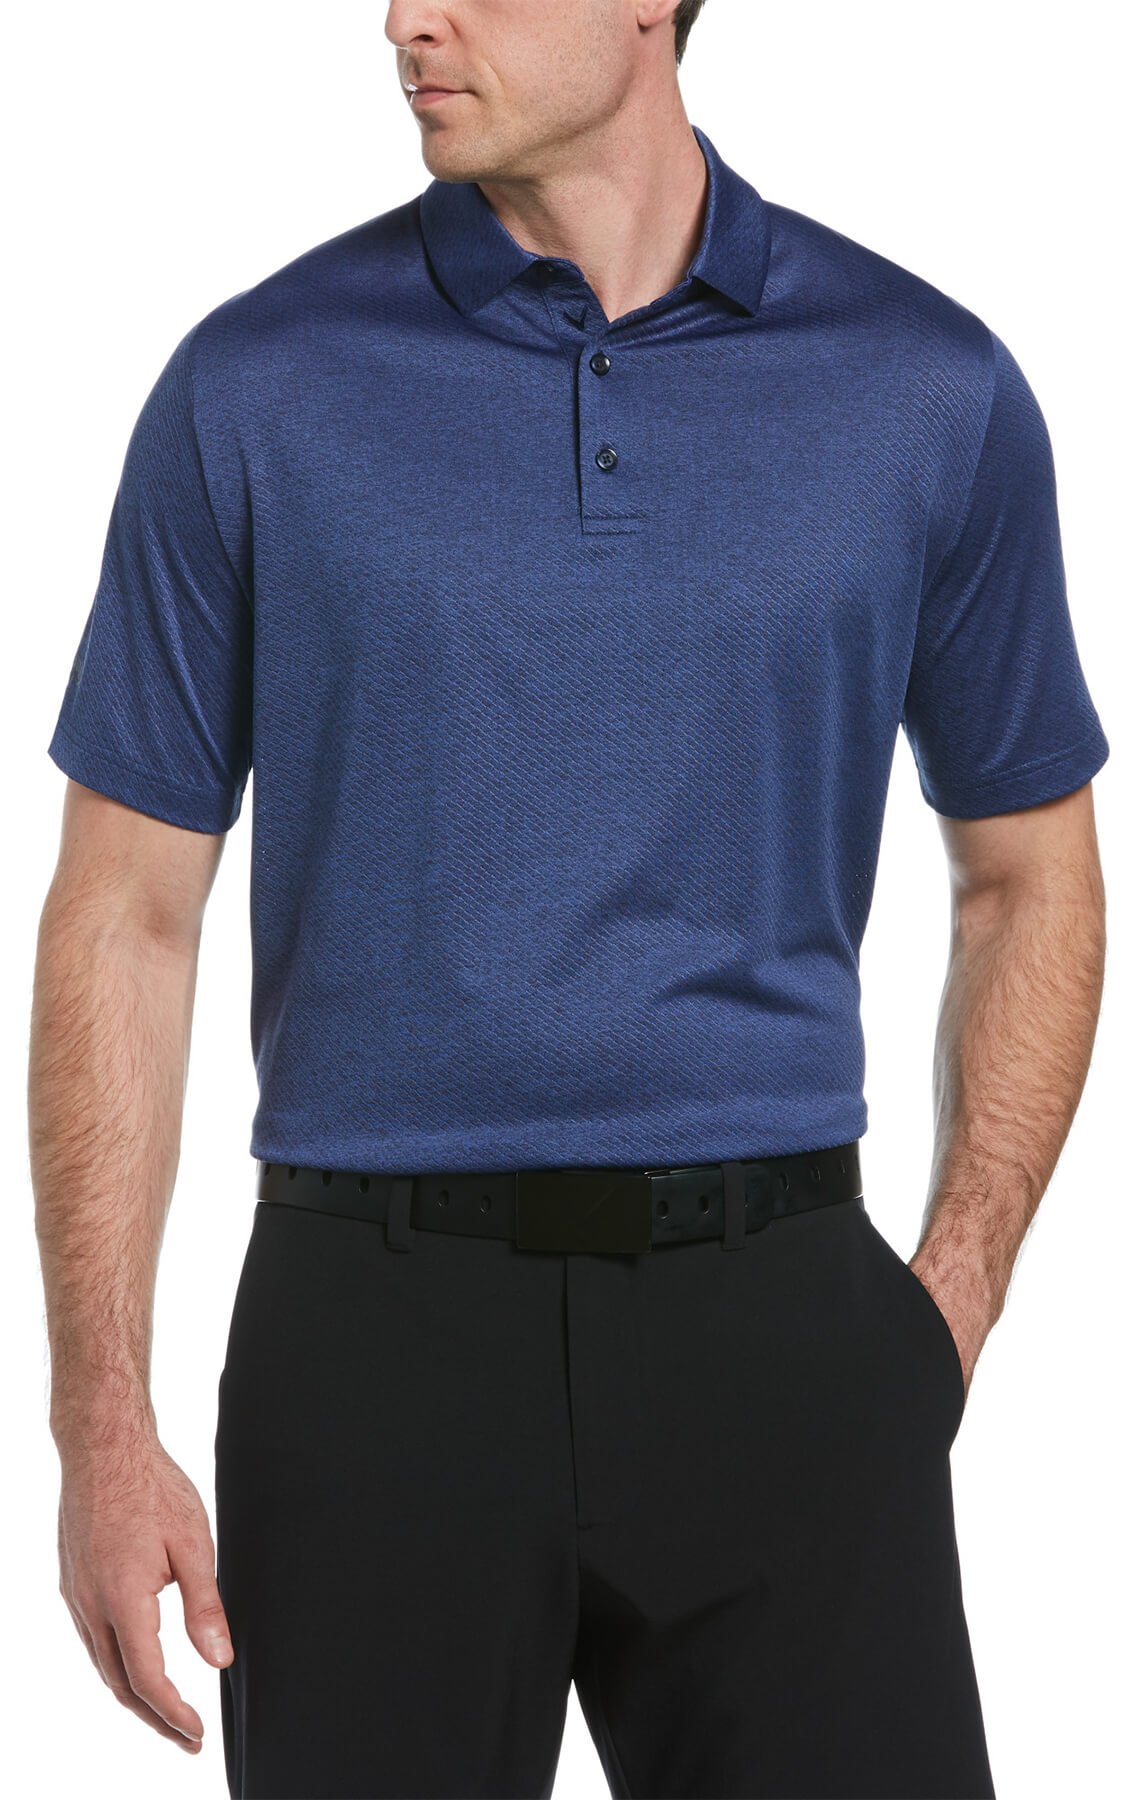 Save 22% on Callaway Men's Ventilated Heather Jacquard Golf Polo, Polyester/elastane In Peacoat Heather, Size S